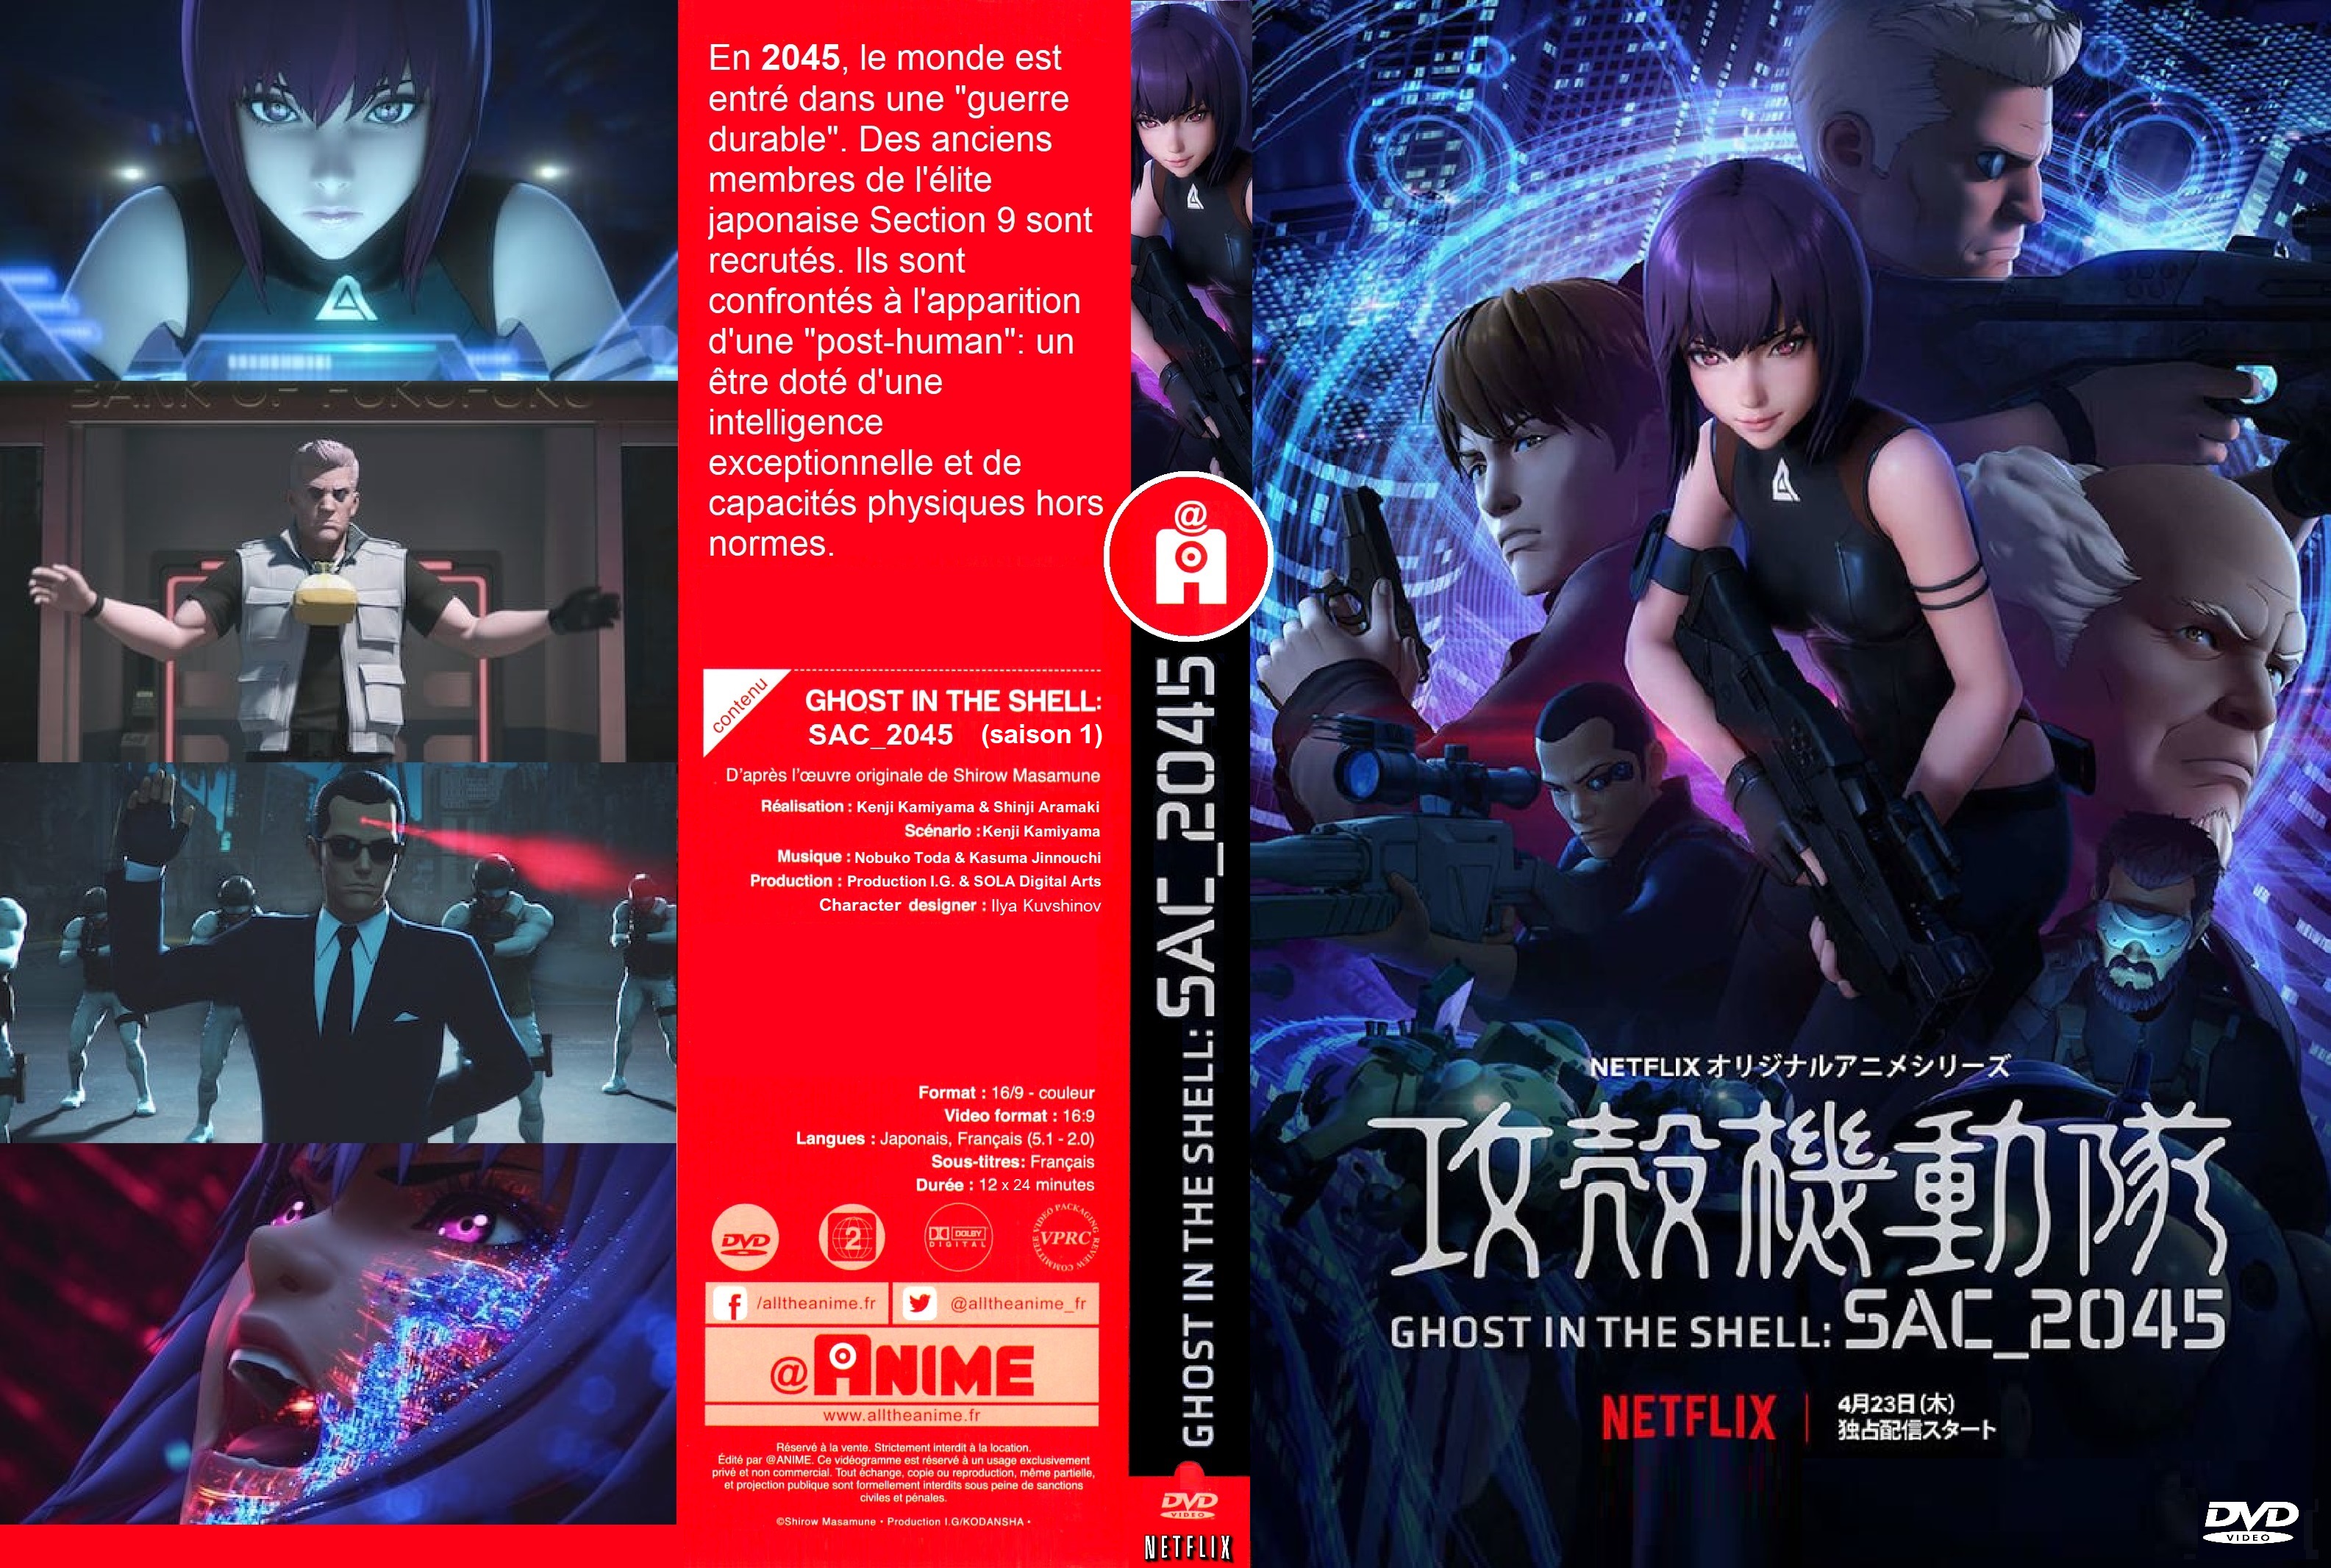 Jaquette DVD Ghost in the Shell SAC 2045 saison 1 custom